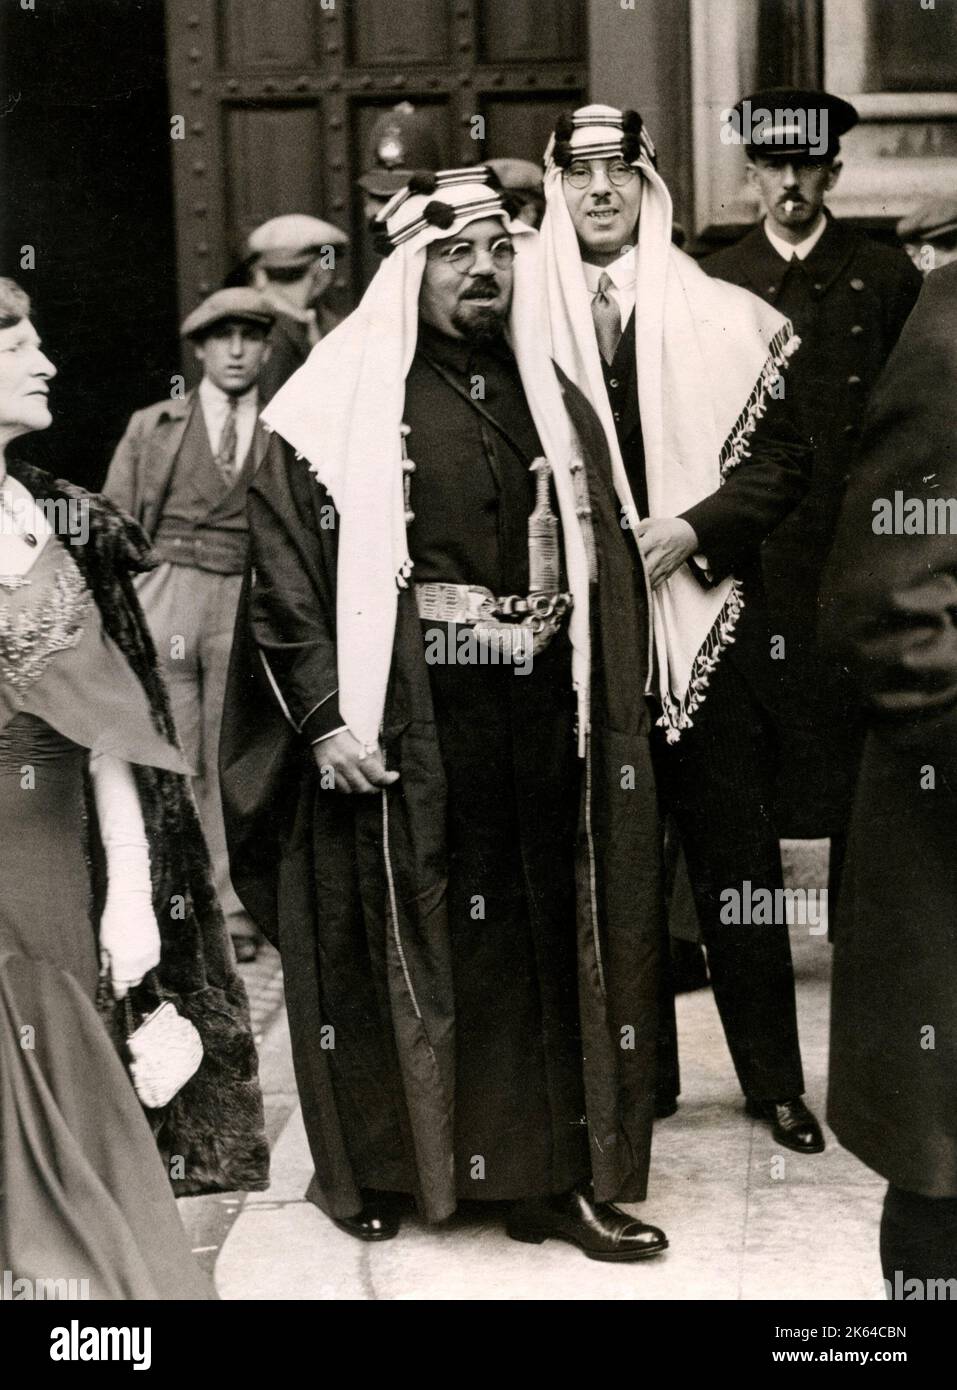 Sheikh Hafiz Wahab - Saudi ambassador to London from 1930 to 1956 - seen here leaving the state opening of parliament in the 1930s. Stock Photo